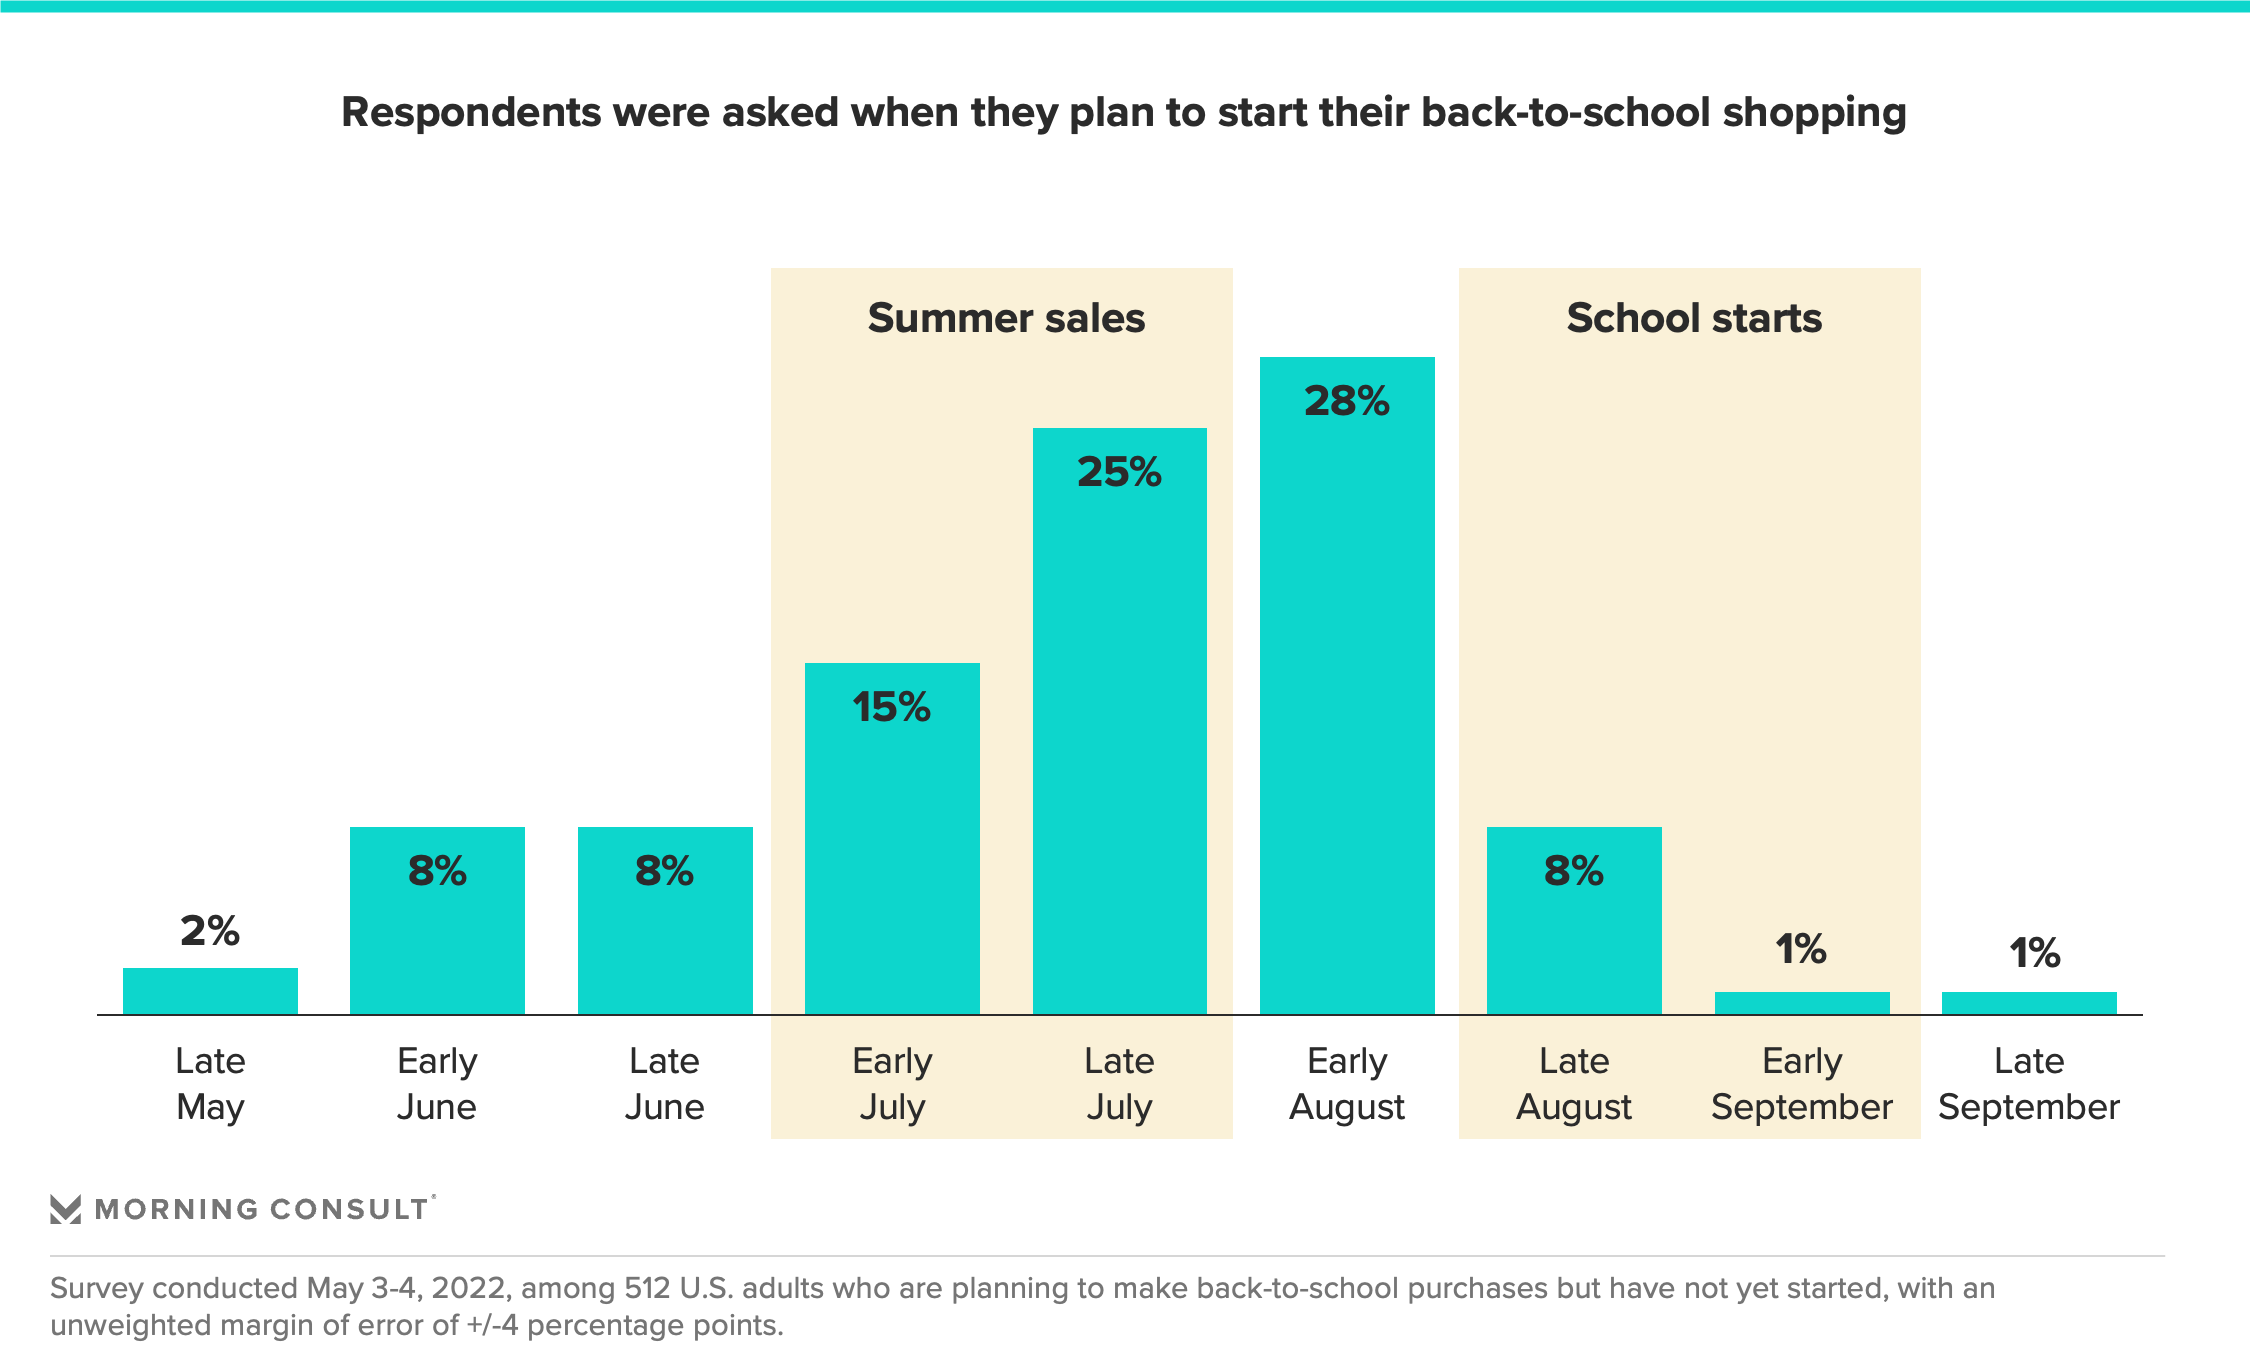 Bar chart depicting when U.S. consumers plan to start back-to-school shopping in 2022